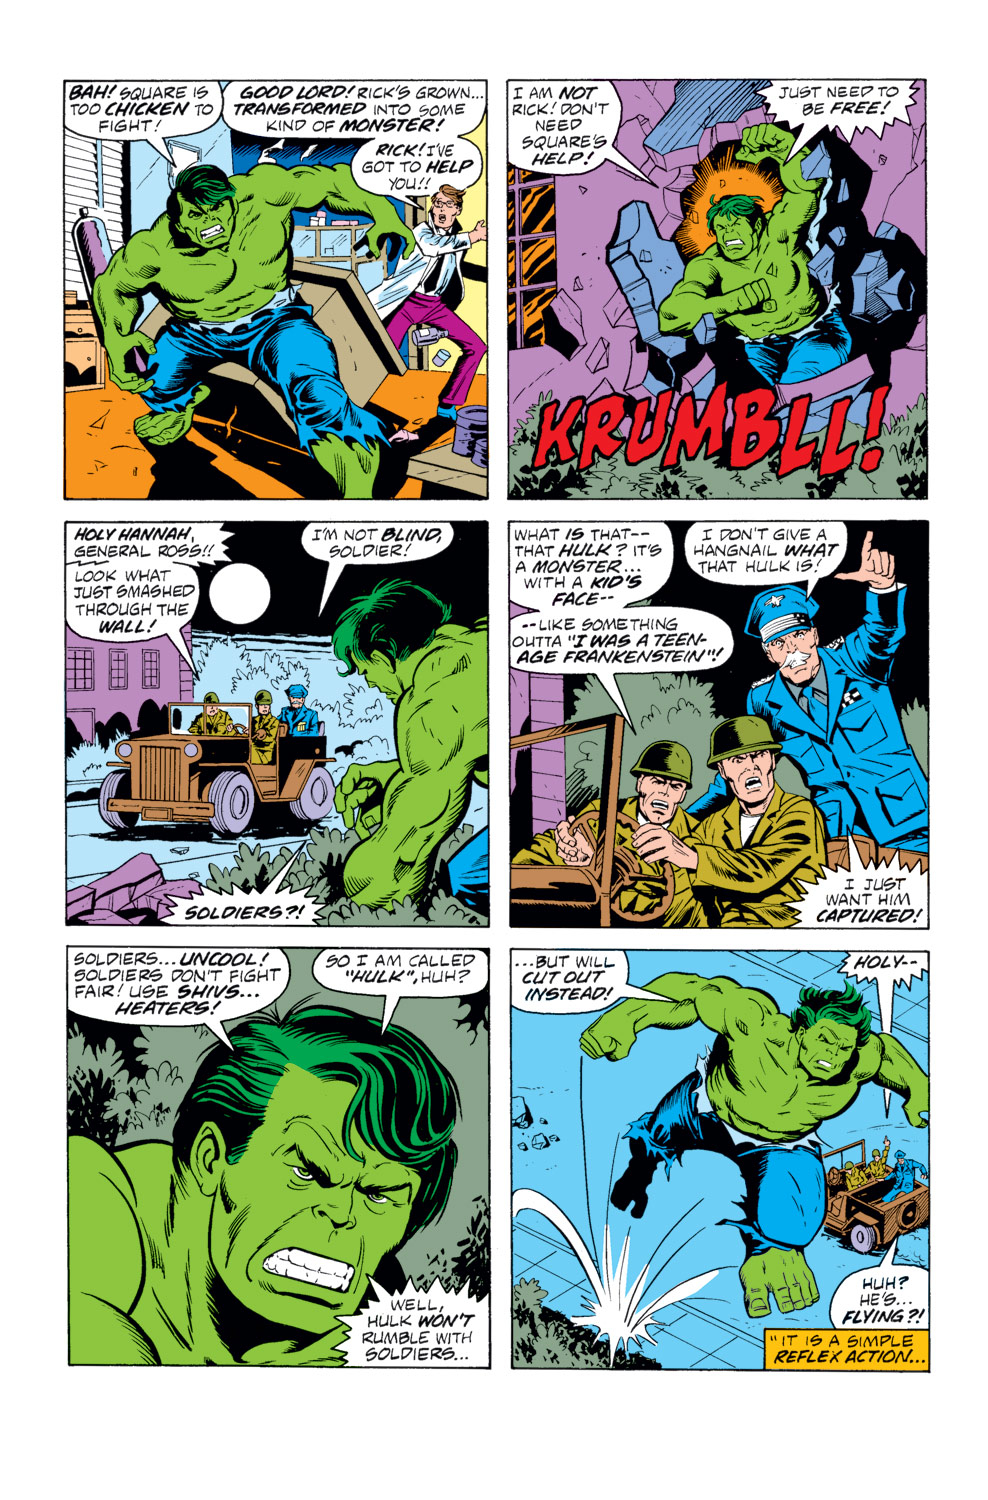 What If? (1977) issue 12 - Rick Jones had become the Hulk - Page 5